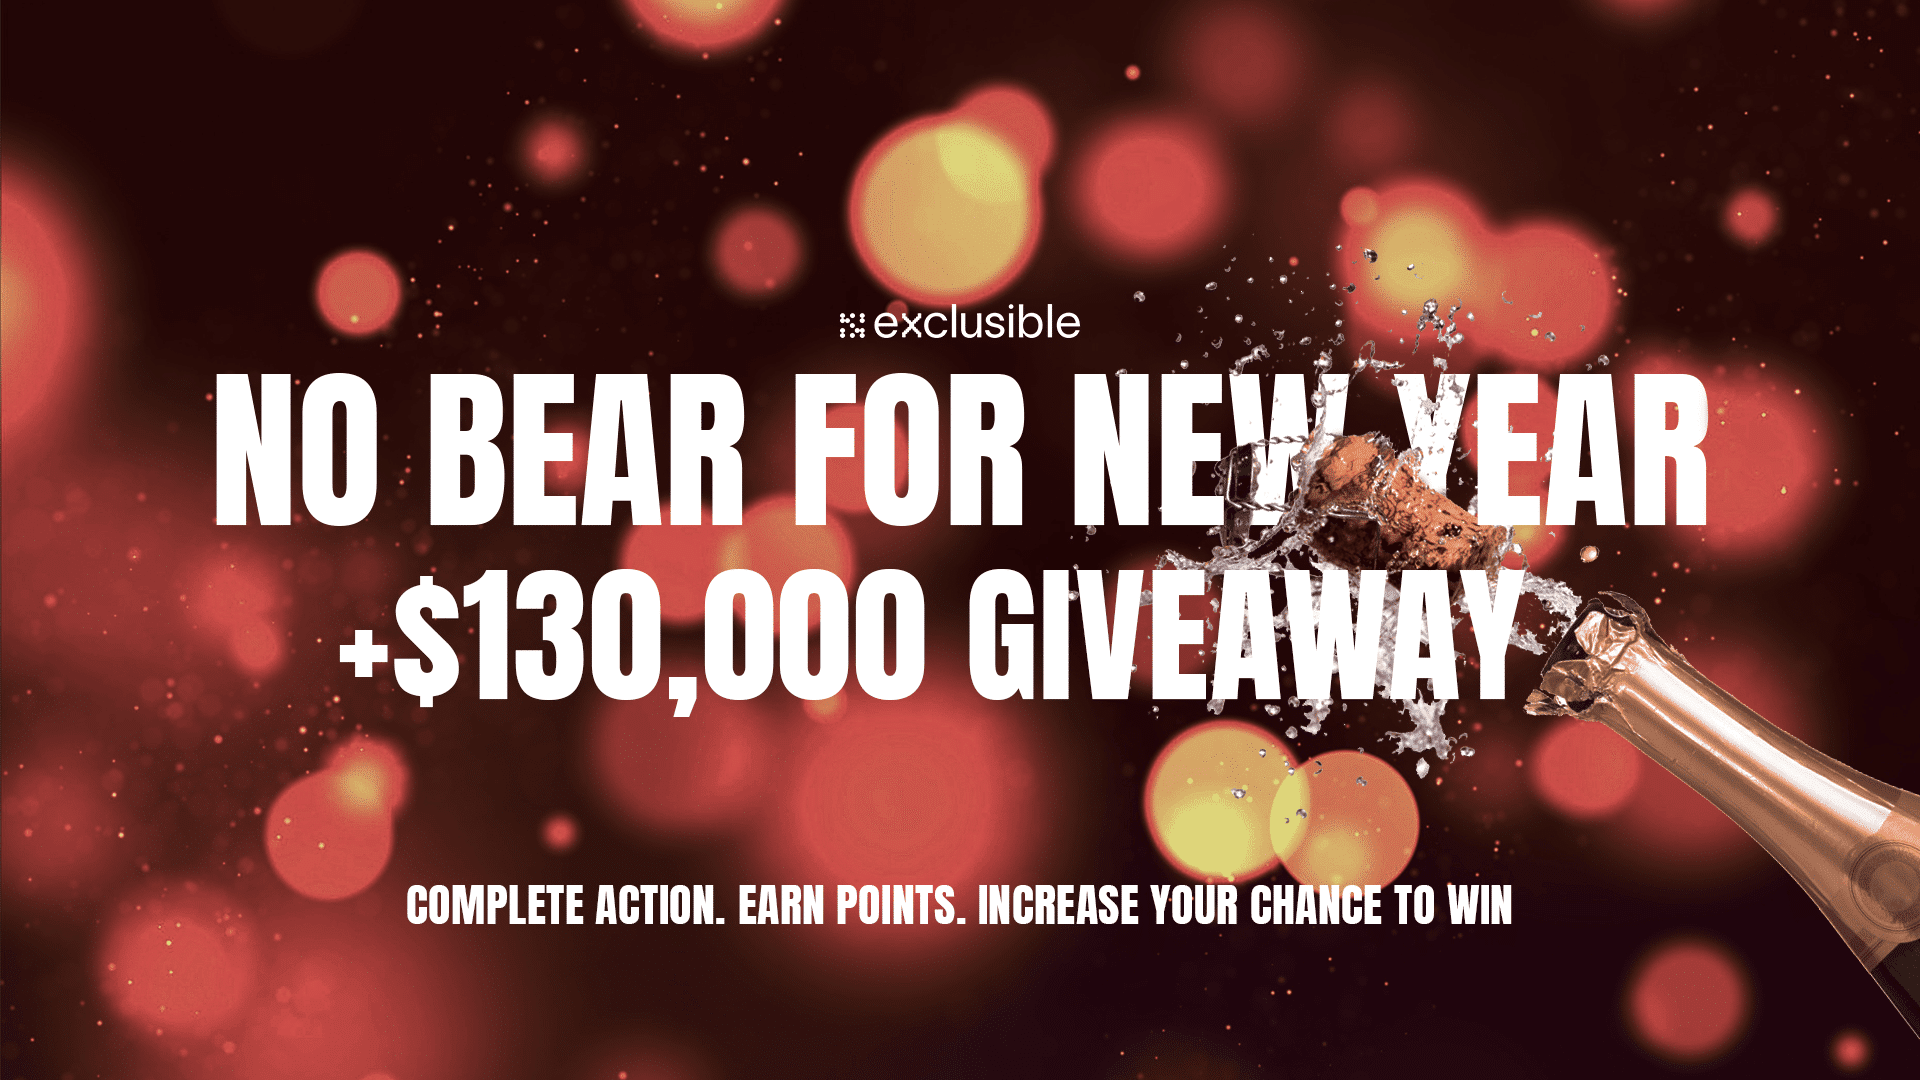 Win +$100,000 Giveaway for New Year 2023